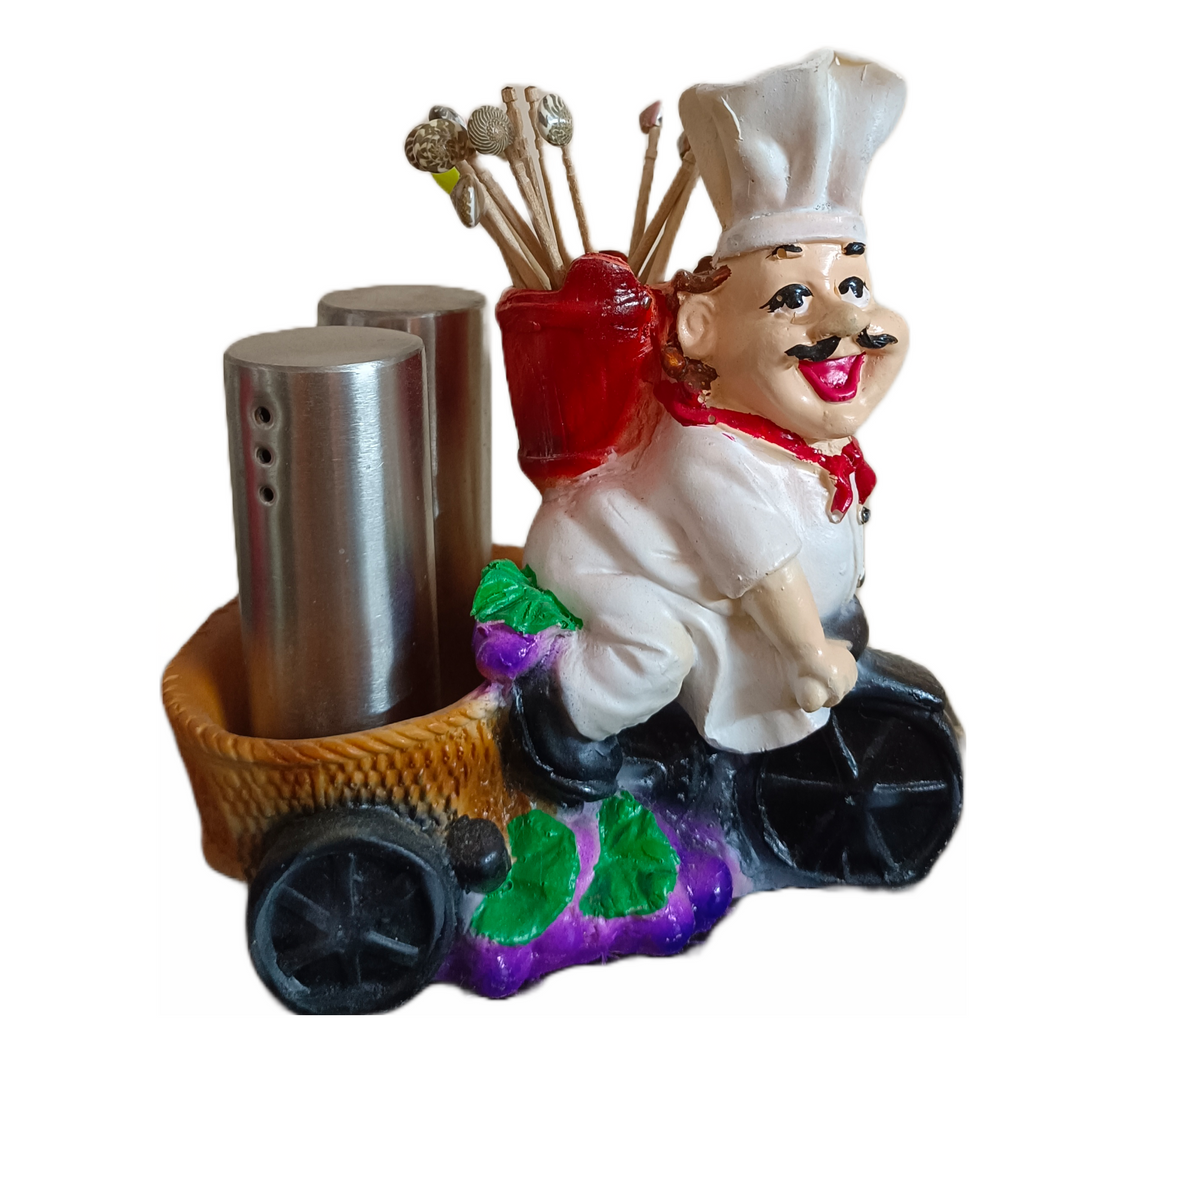 Chef on Bicycle